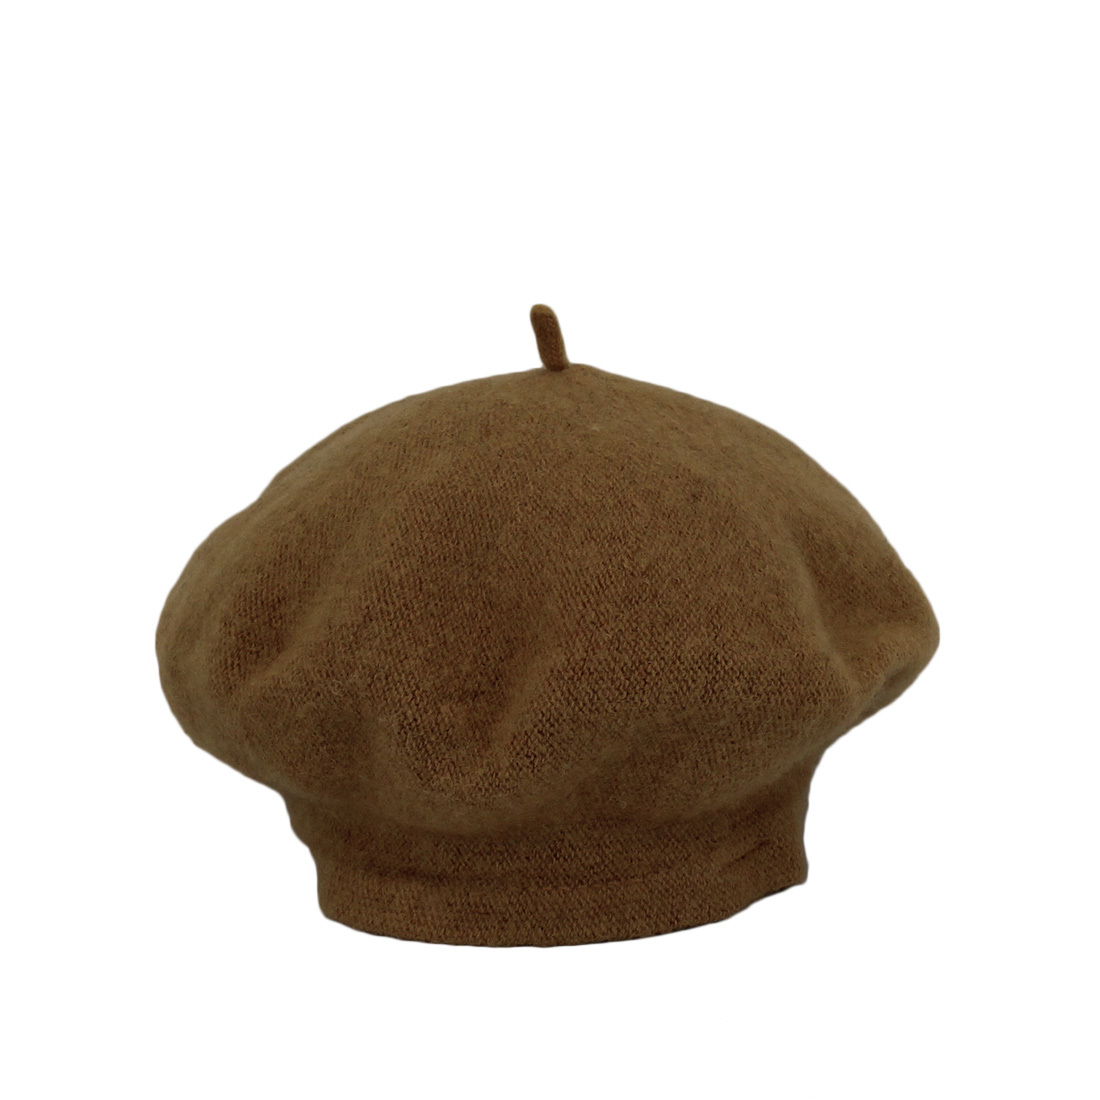 * French style barret cap